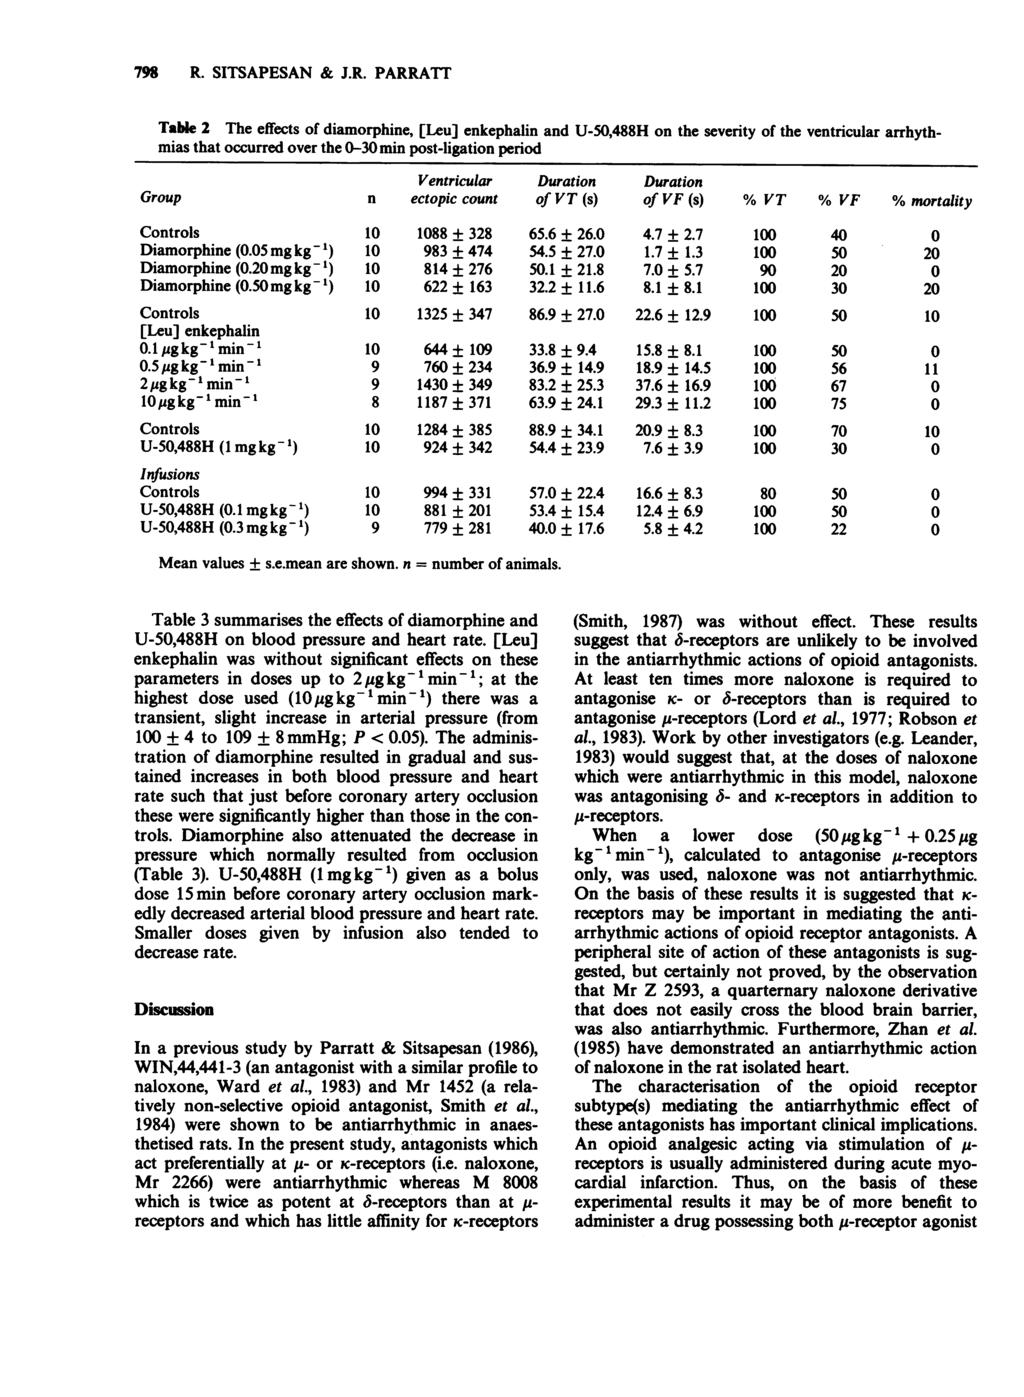 798 R. SITSAPESAN & J.R. PARRATT Table 2 The effects of diamorphine, [Leu] enkephalin and U-5,488H on the severity of the ventricular arrhythmias that occurred over the -3 min post-ligation period Group Diamorphine (.